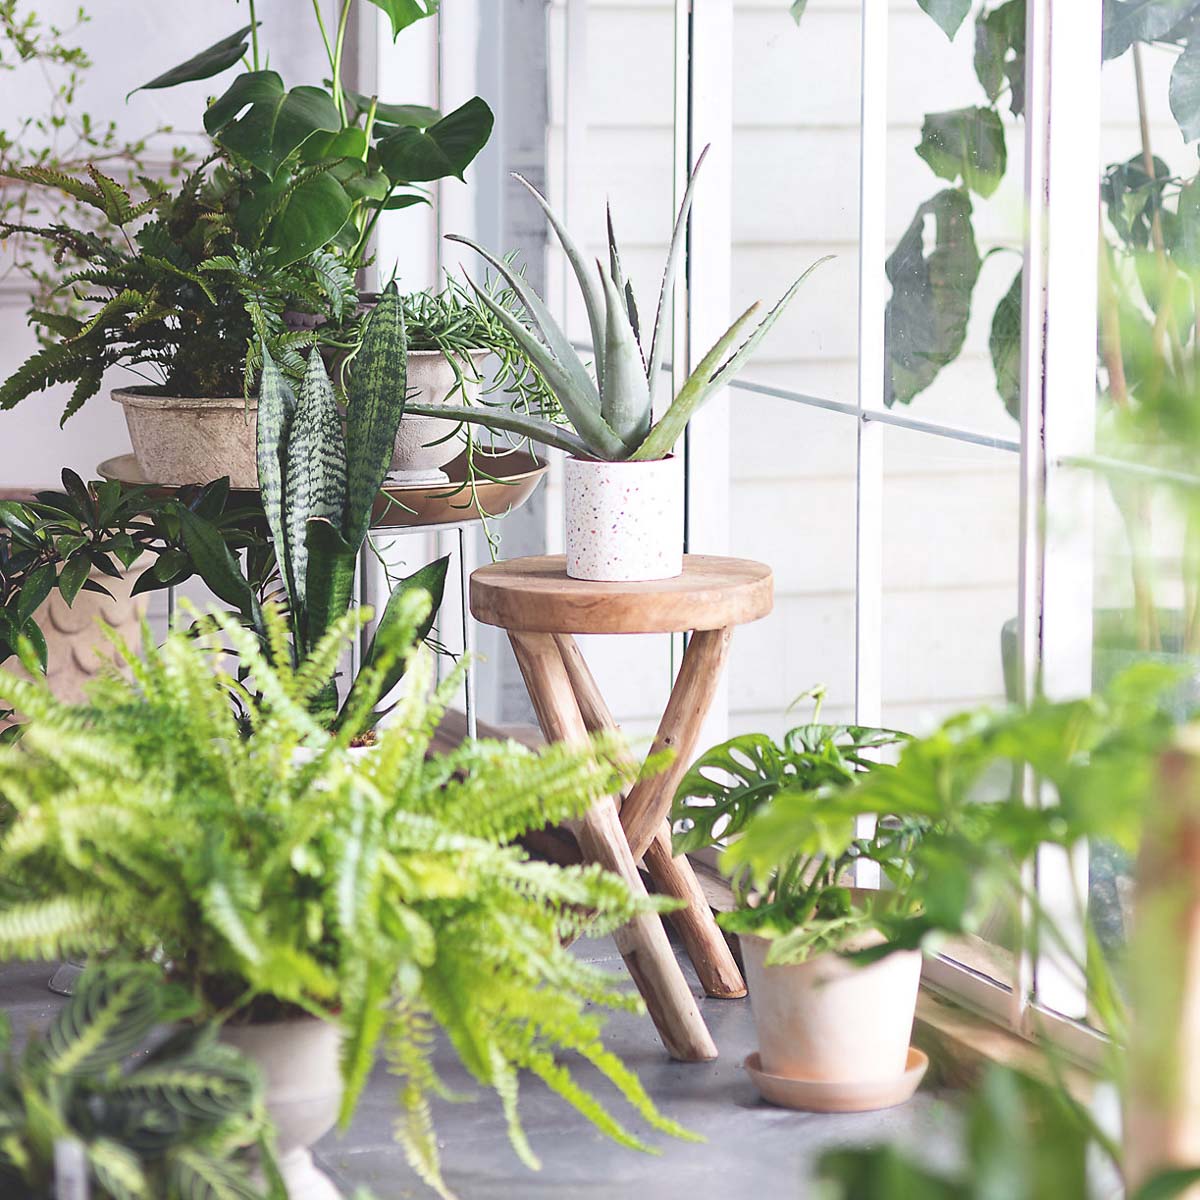 Biophilic design including adding lots of plants to your home is a 2022 design trend!